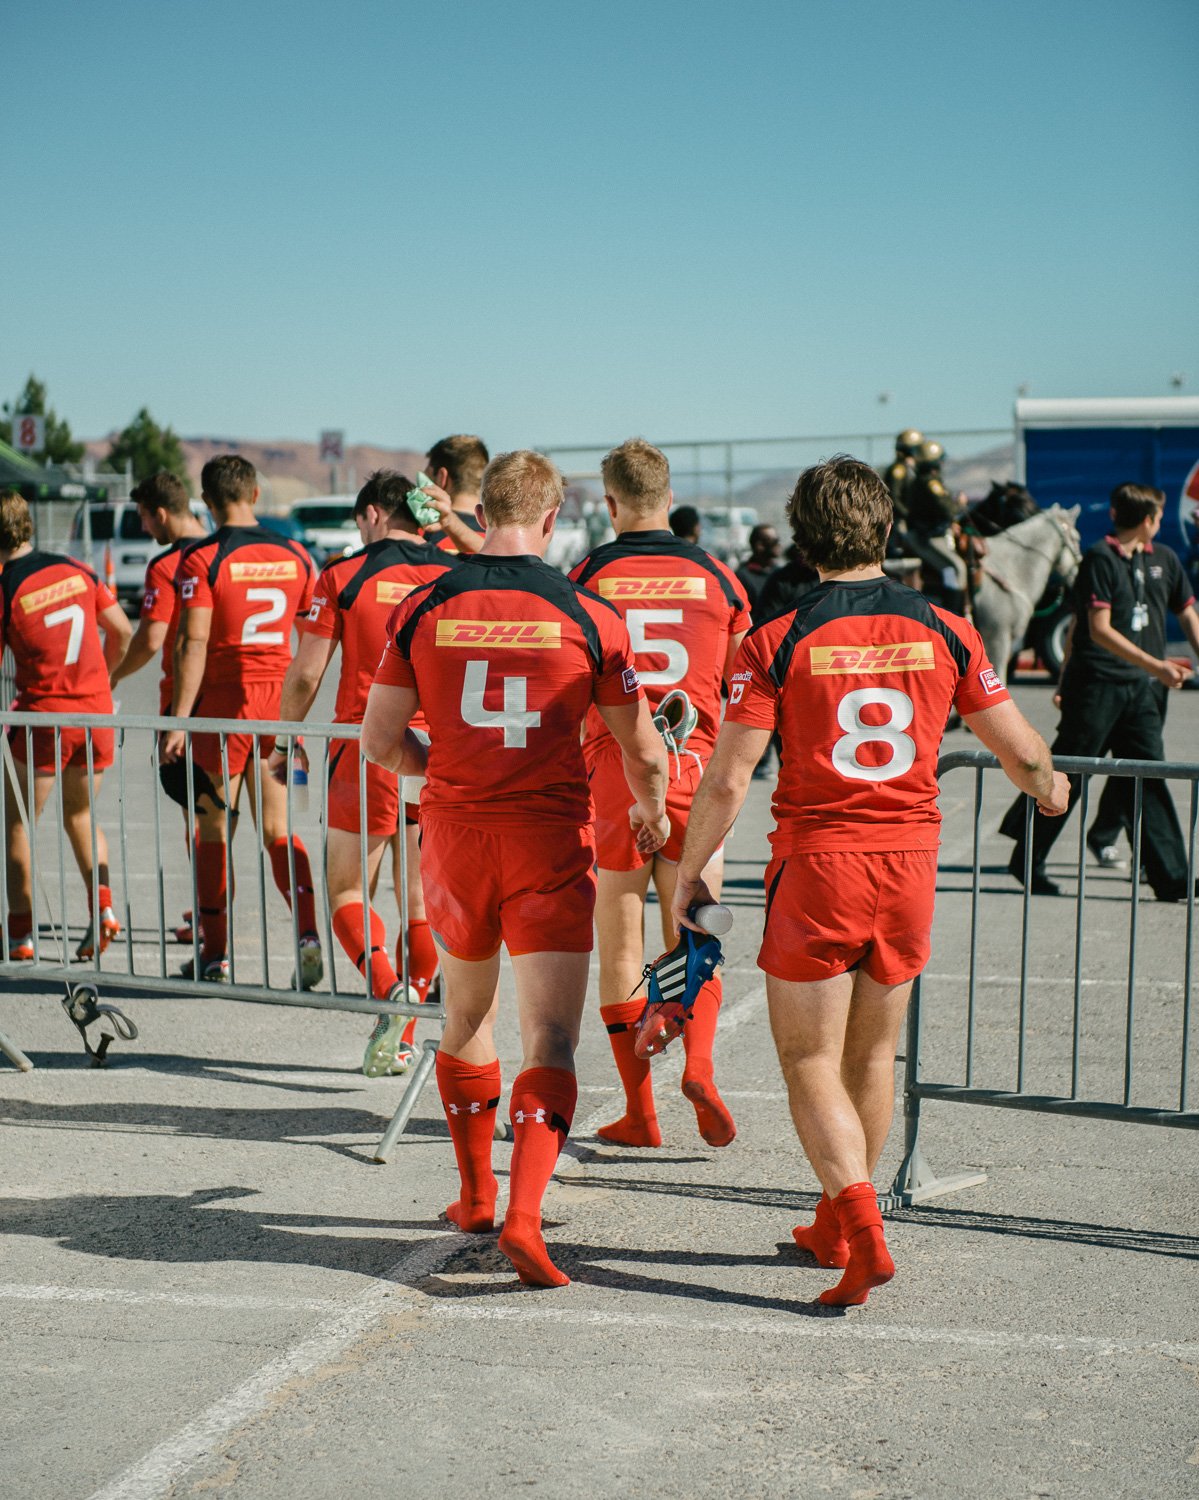  The Canadian Men's Rugby Sevens Team after a match, Las Vegas, NV, for Sportsnet Magazine, 2015 